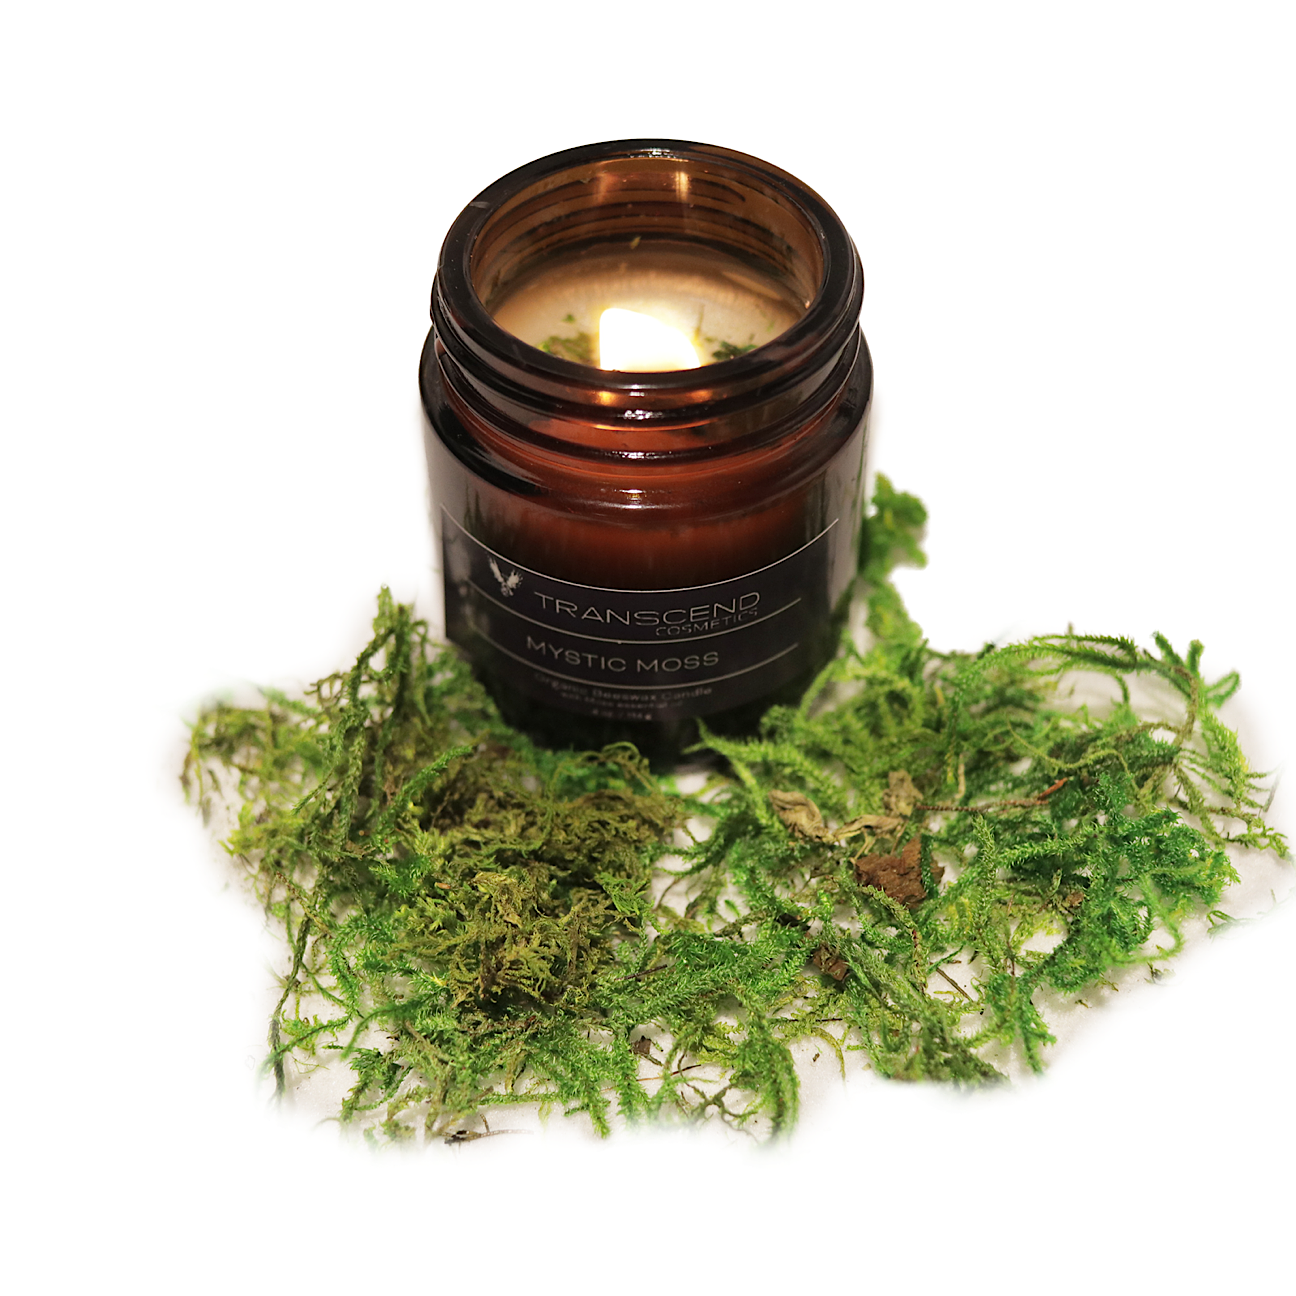 “Mystic Moss” - Organic Beeswax Candle